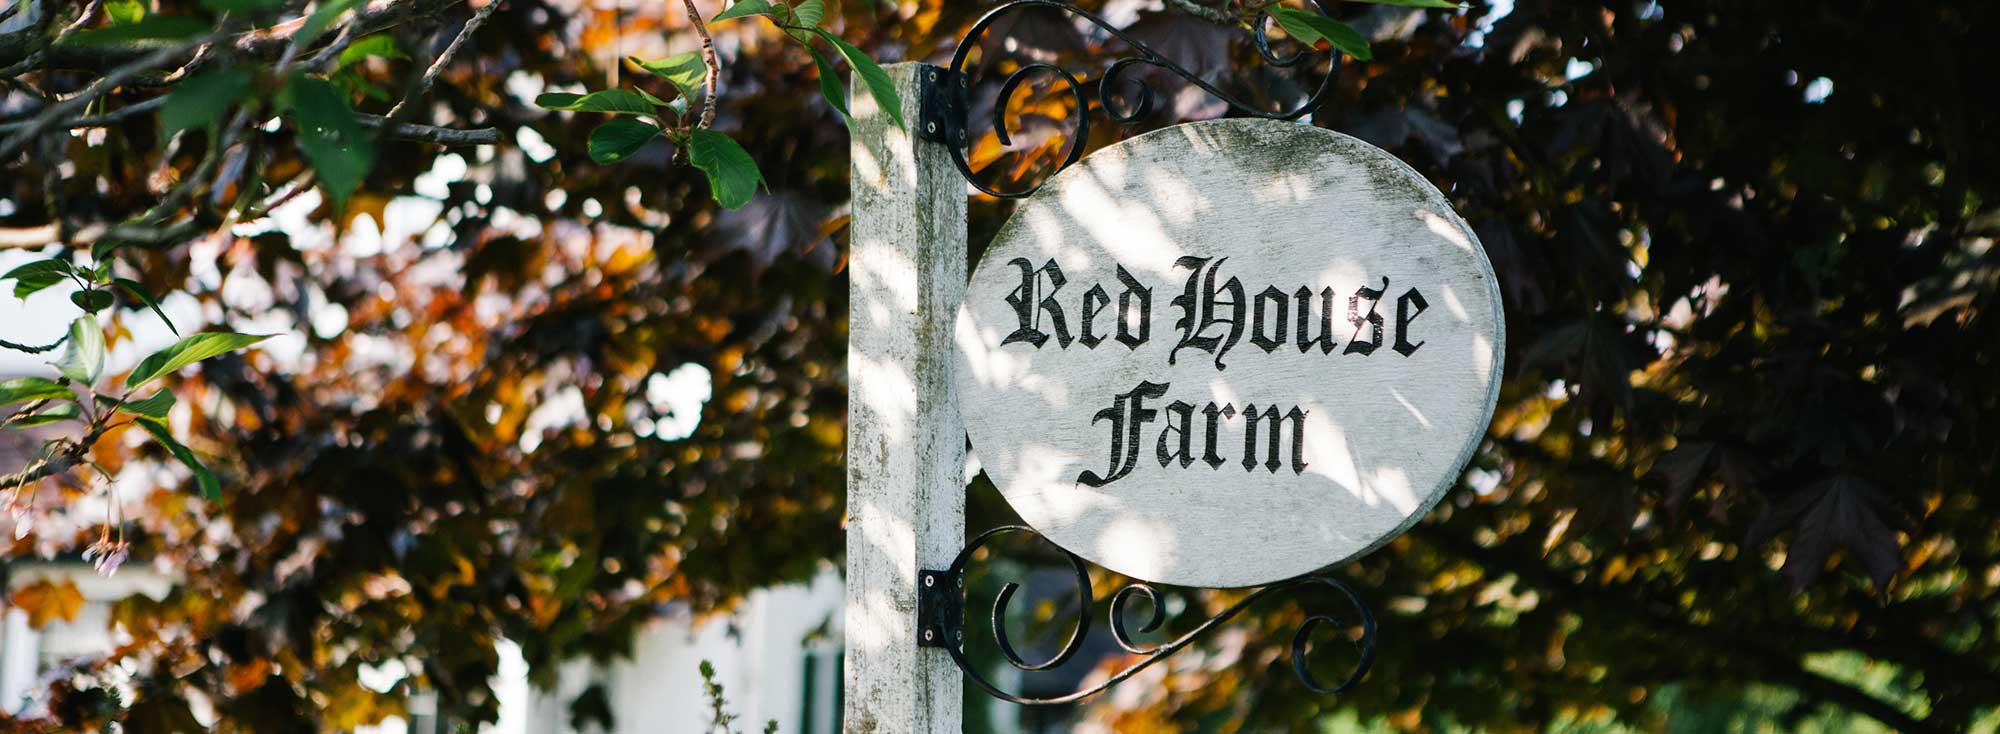 About Us - Redhouse Farm History